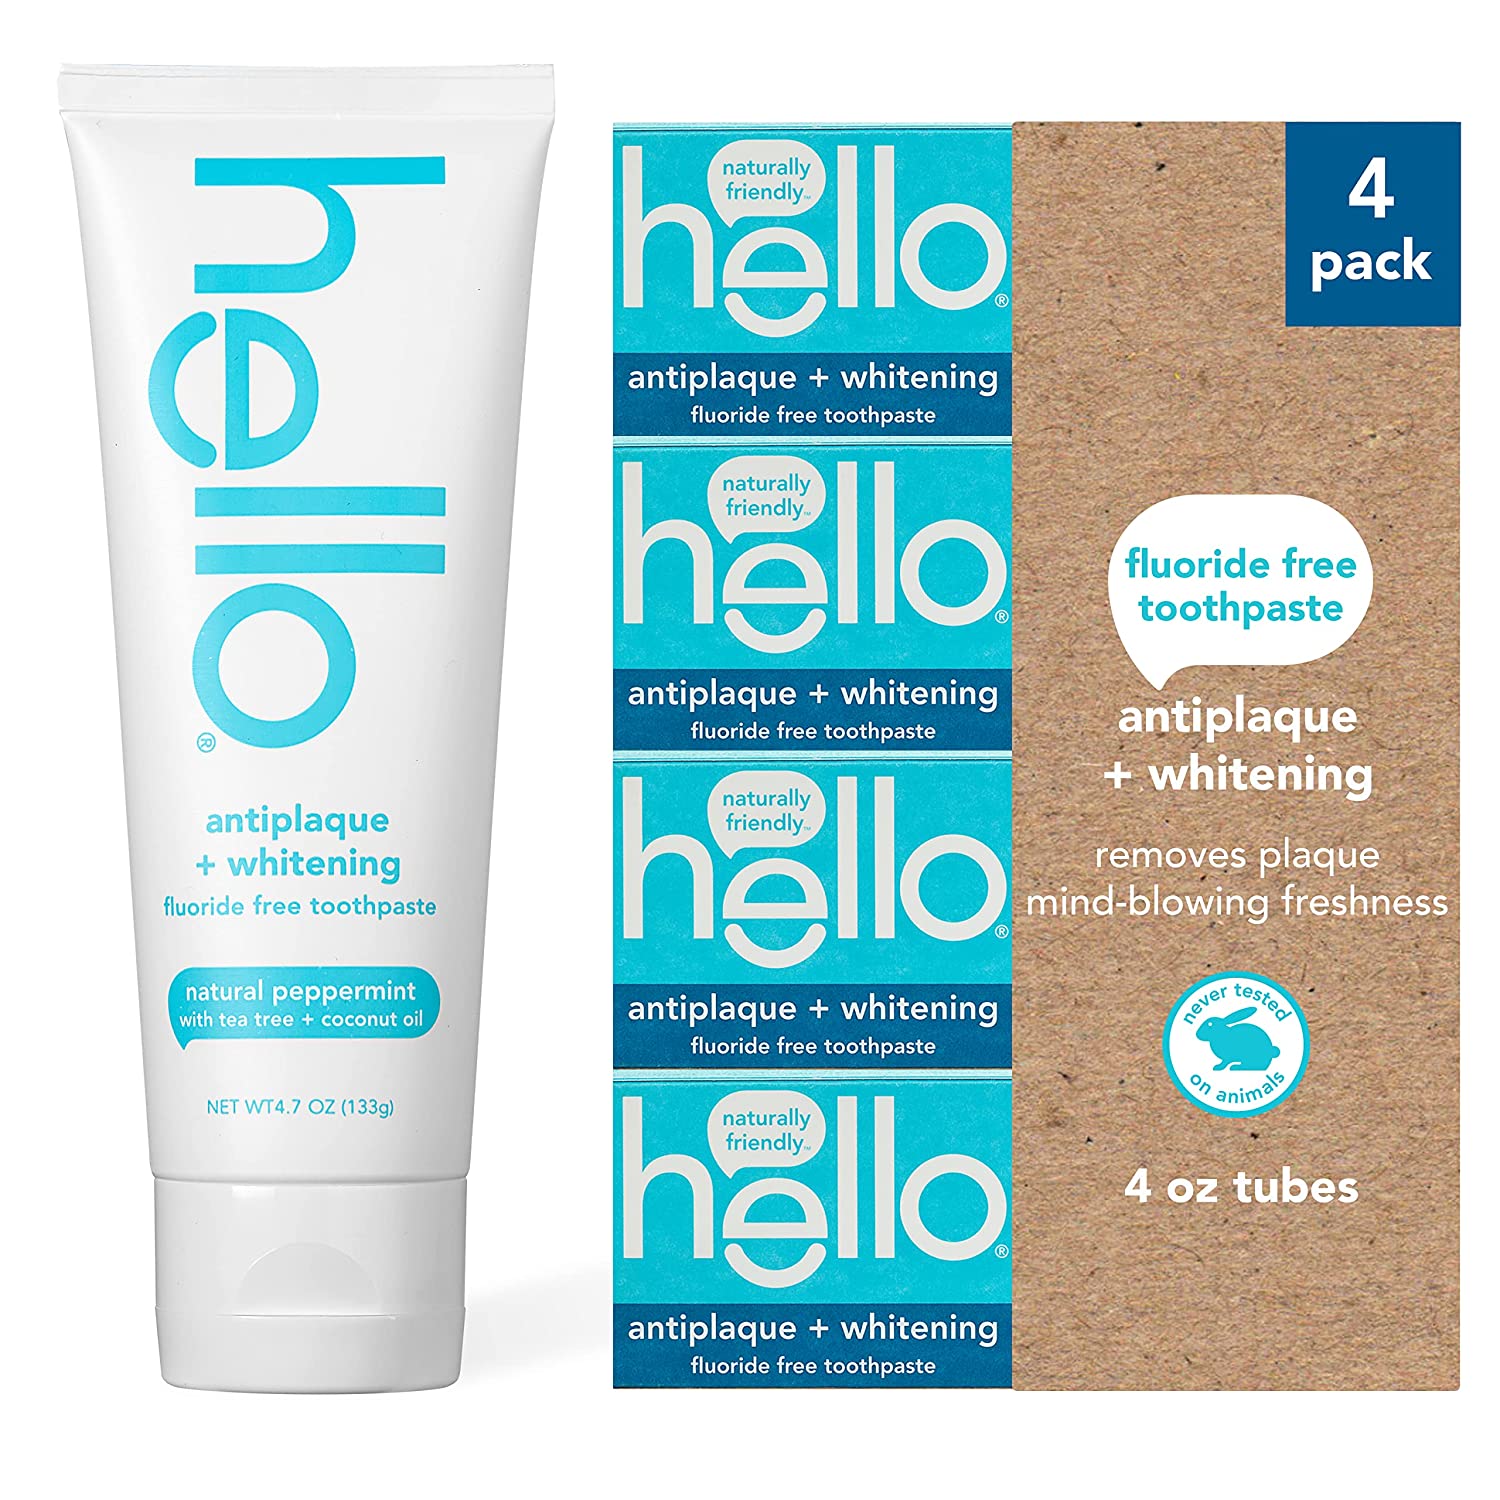 Hello Oral Care Fluoride Free Antiplaque and Whitening Toothpaste Vegan SLS Free with Tea Tree Oil Coconut Oil, Natural Peppermint, 4.7 Ounce